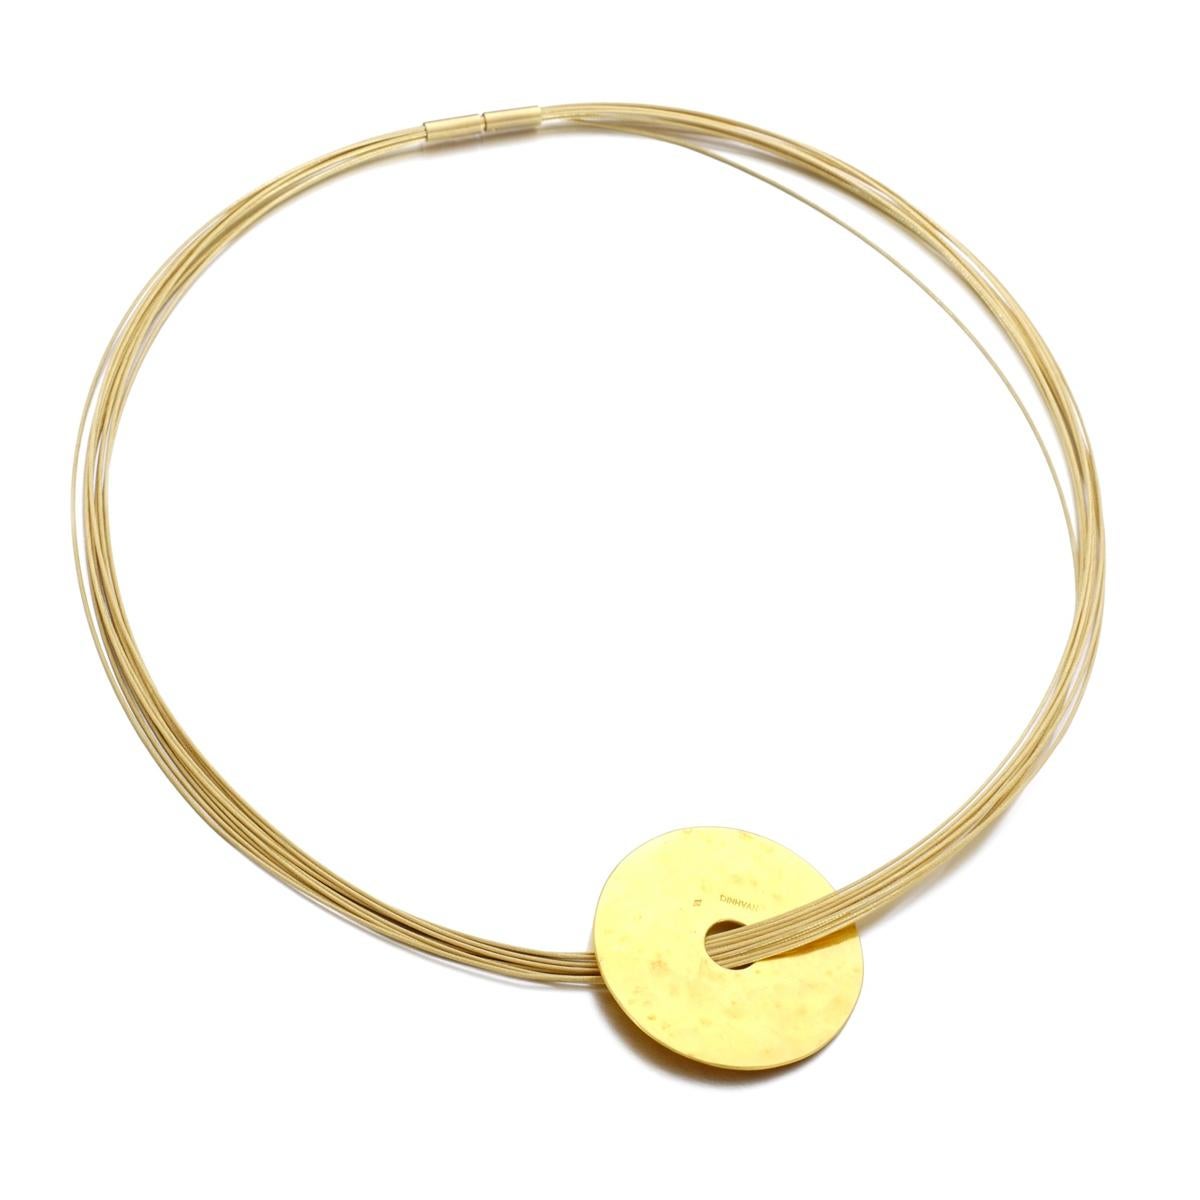 An incredible Dinh Van pendant necklace showcasing a hammered disc suspended by a multistranded braided cable necklace in 18k yellow gold. The necklace measures 16.5